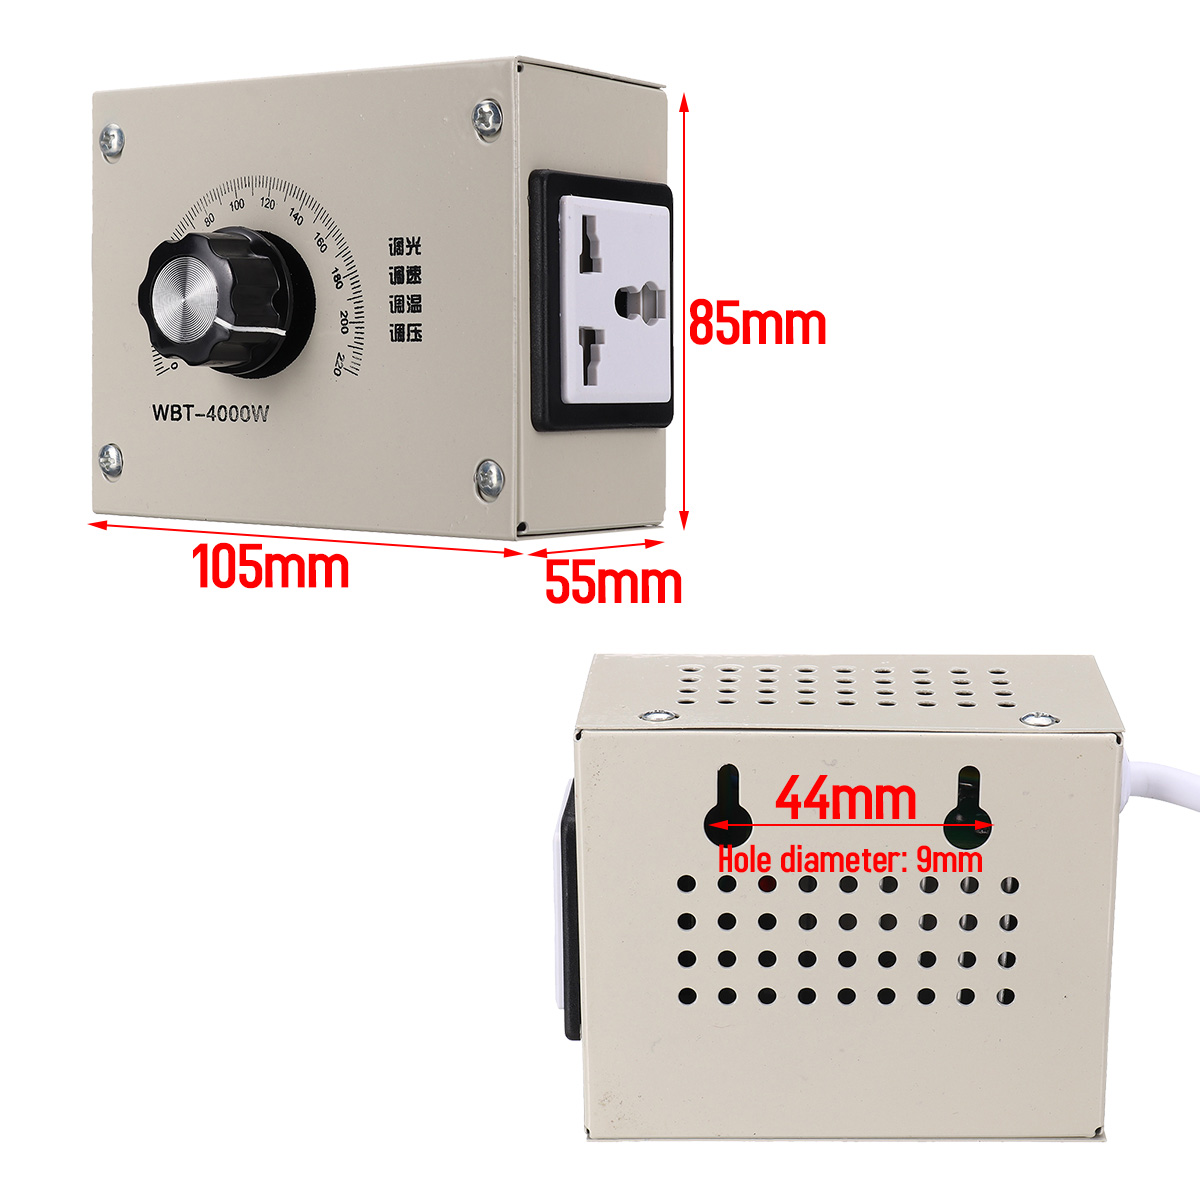 AC-0-220V-4000W-Adjustable-Voltage-Speed-Temperature-Dimmer-Controller-For-Thermostat-Light-Fan-Moto-1457283-7